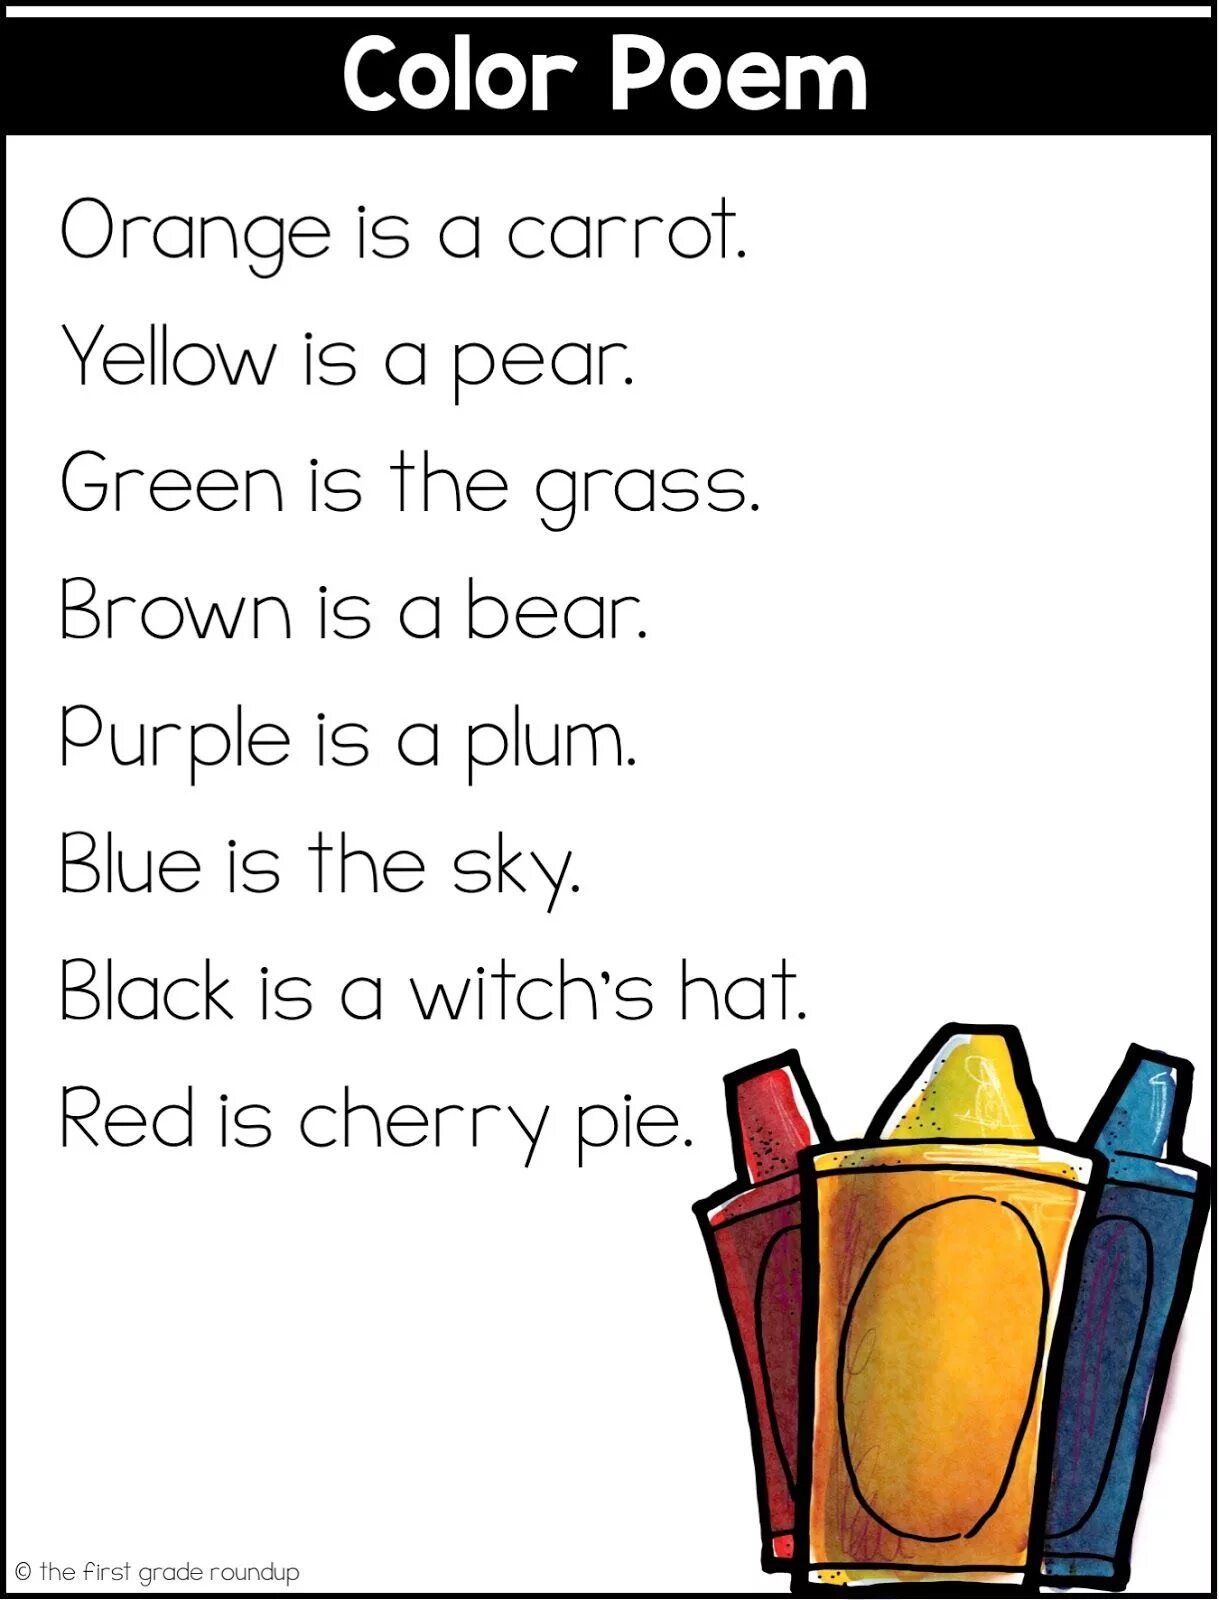 Poems for Kids. Easy poems for Kids. English for Kids poem simple. Poems about English for Kids. Short poems